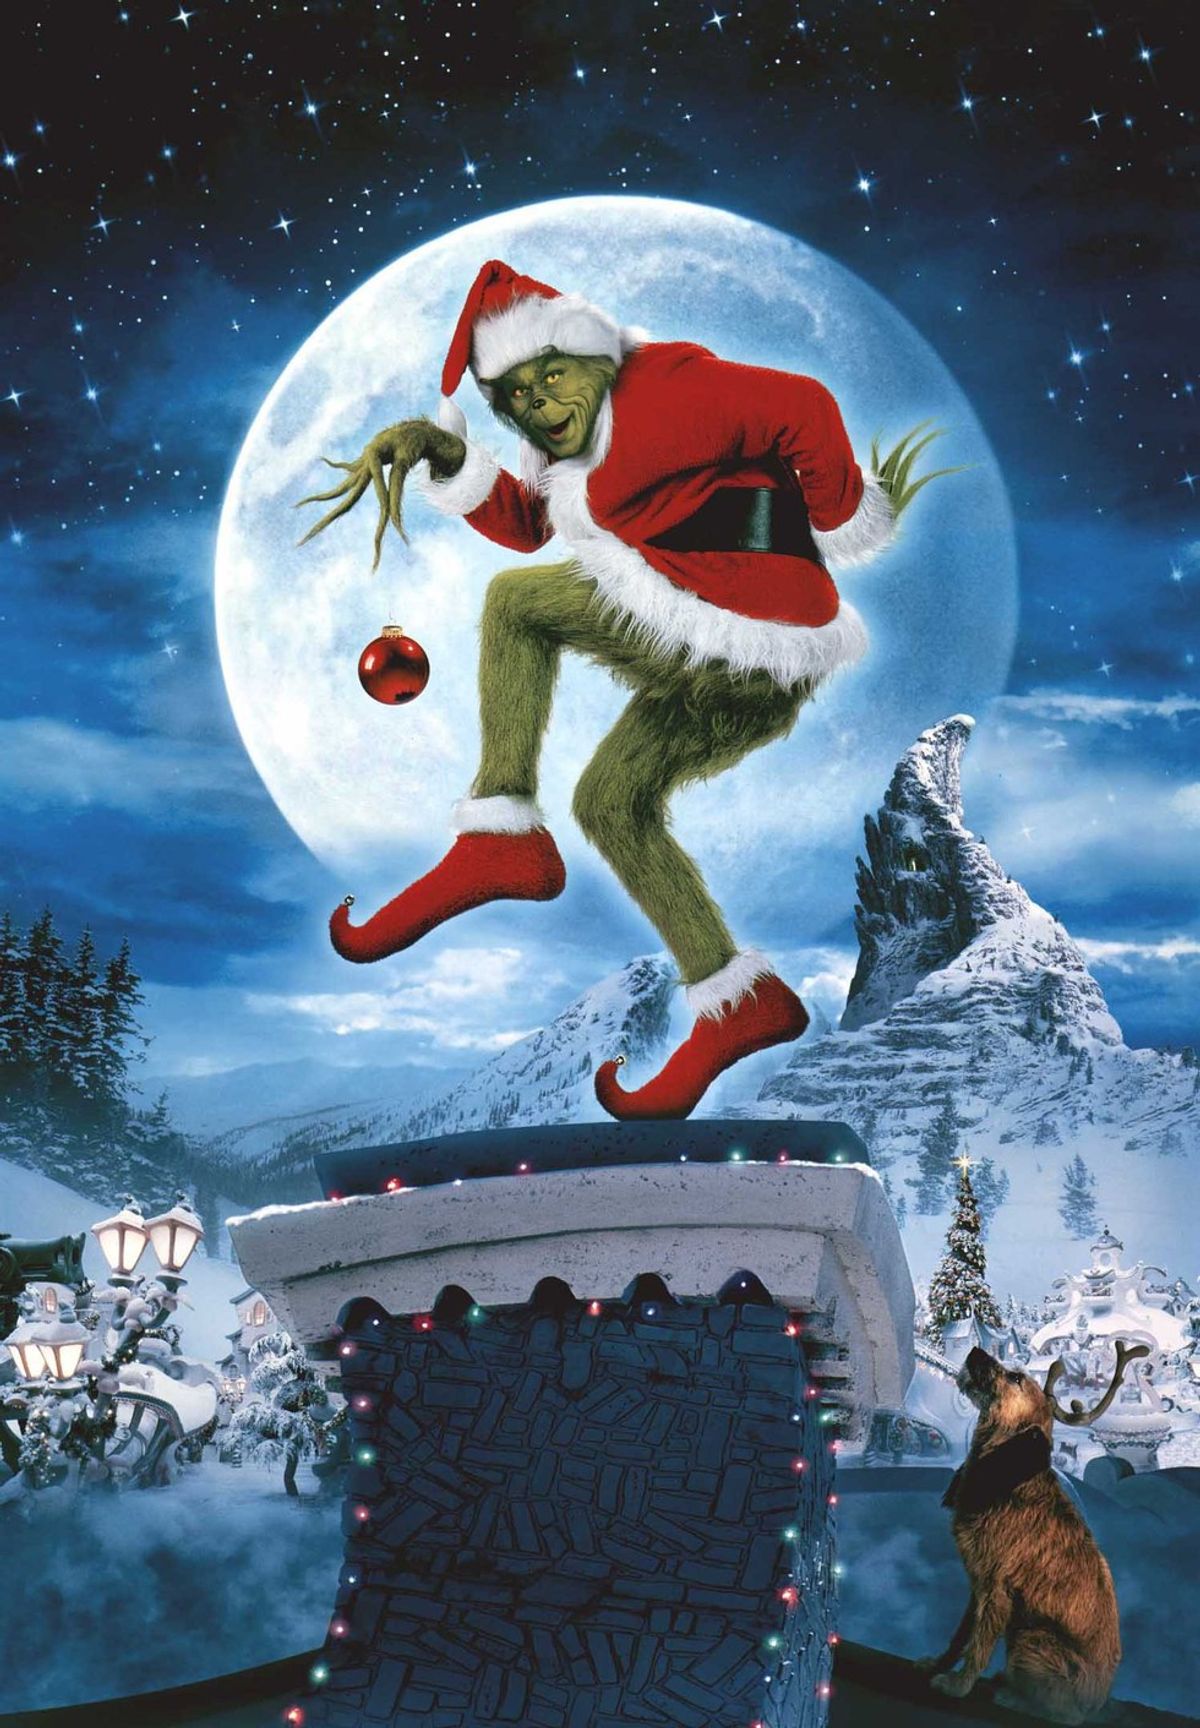 10 Ways The Grinch Is Relatable to College Students